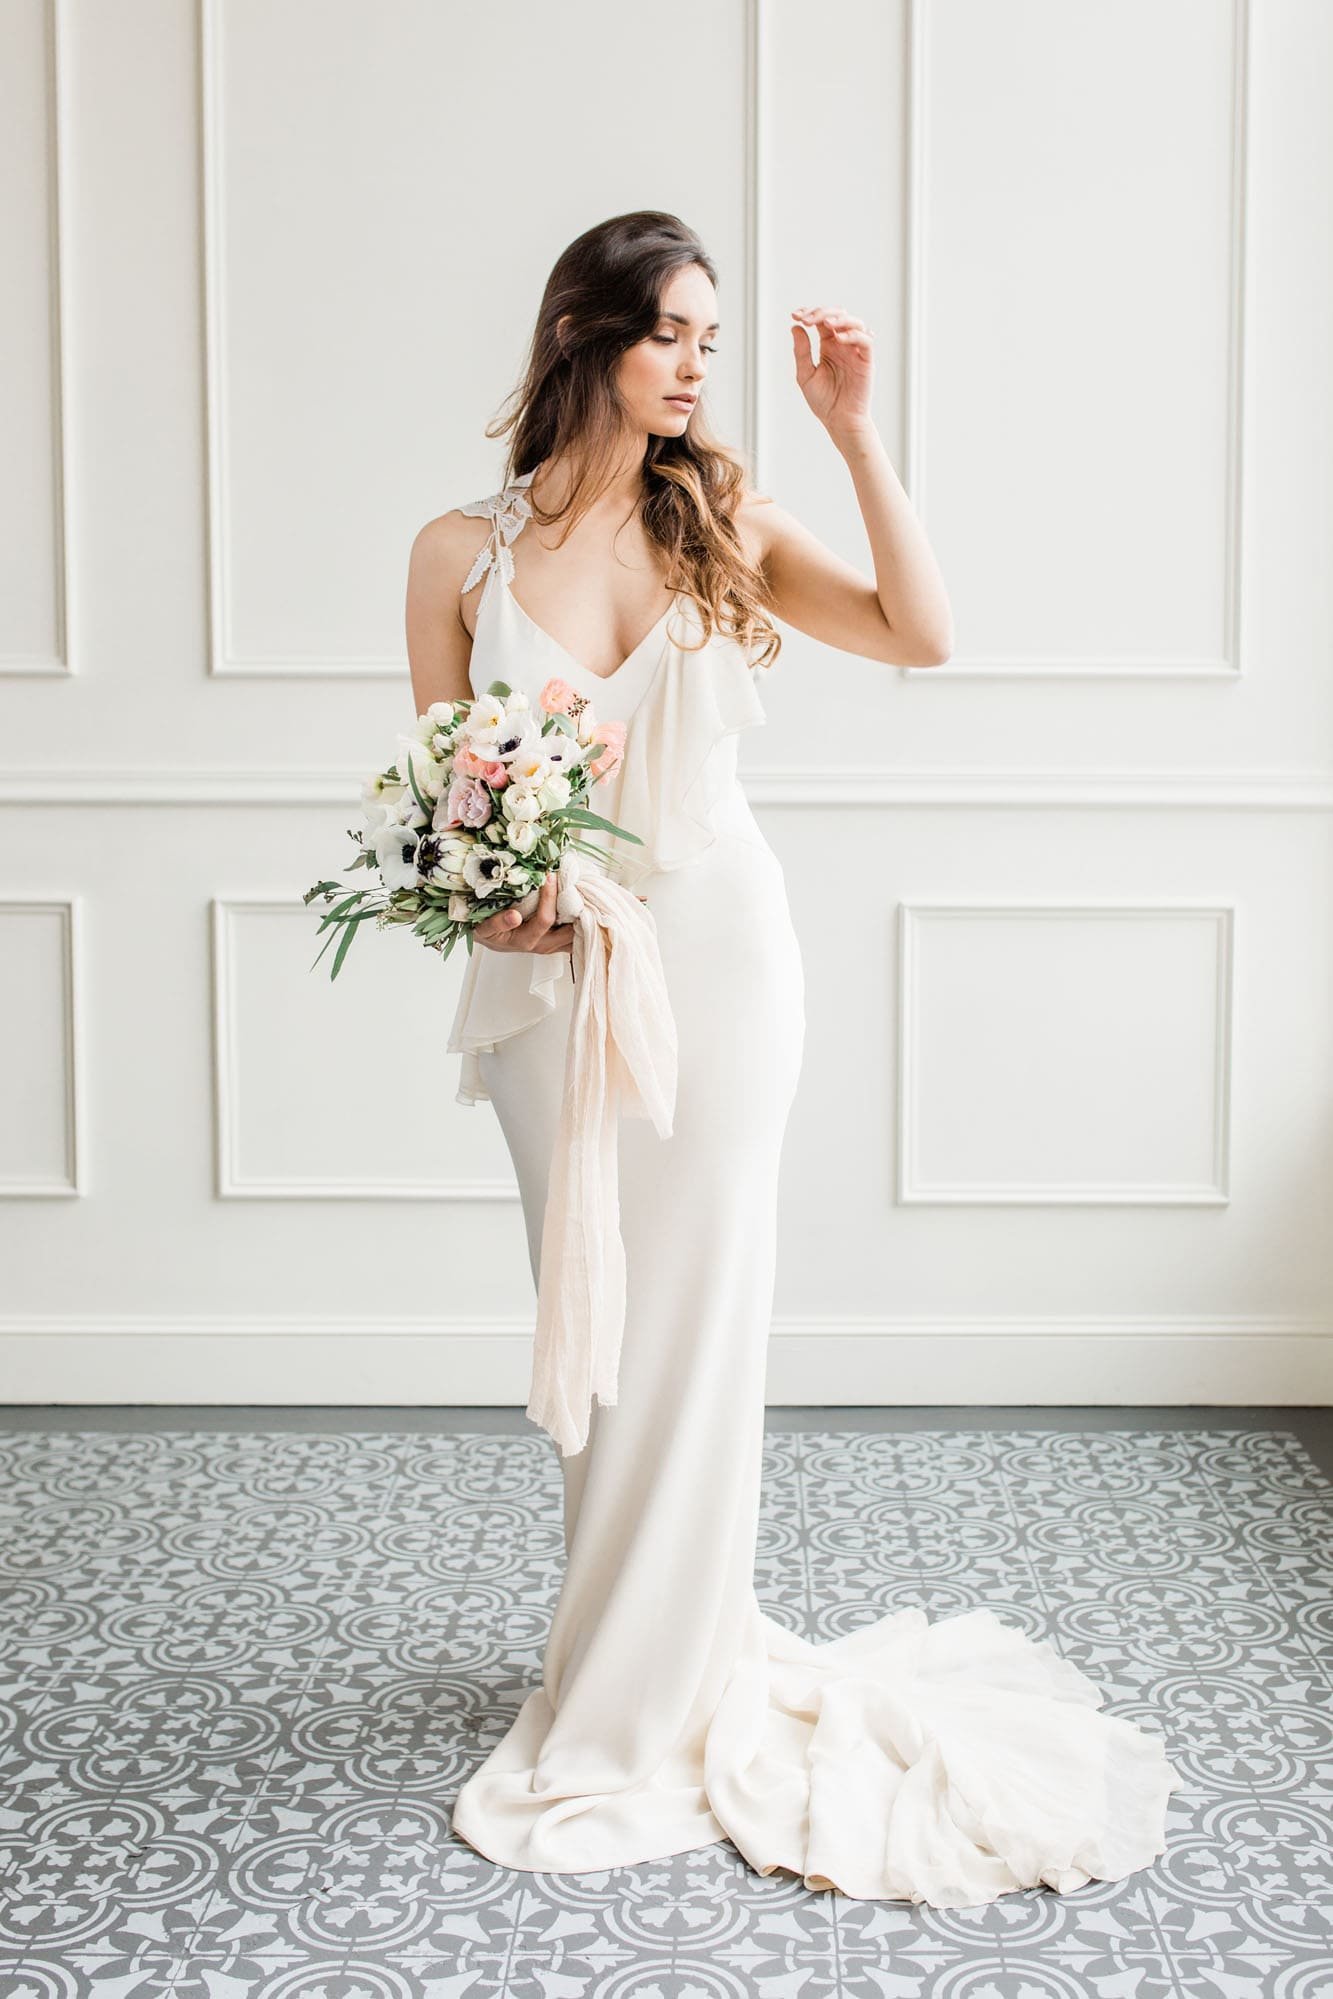 Unique wedding dress with ruffle detail and long train from Portland bridal boutique